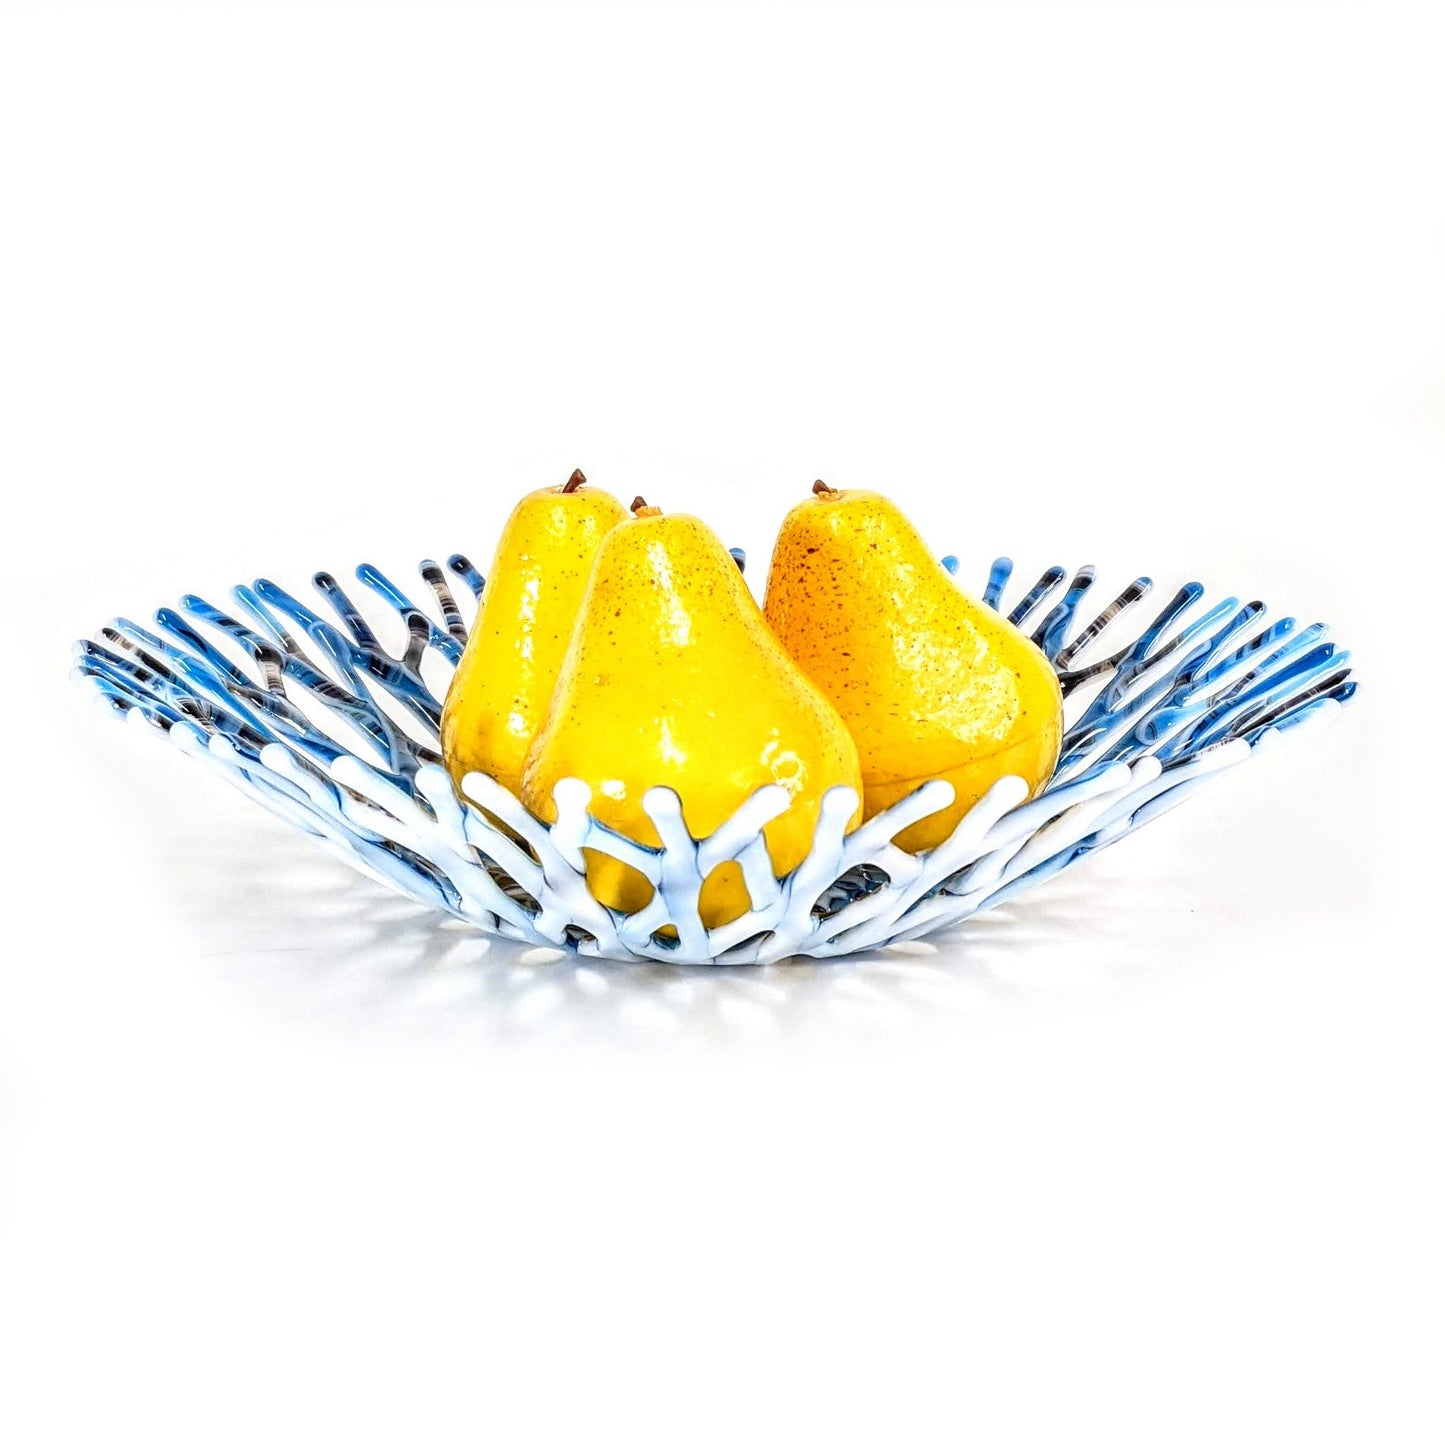 Blackberry & Turquoise Glass Art Coral Bowl